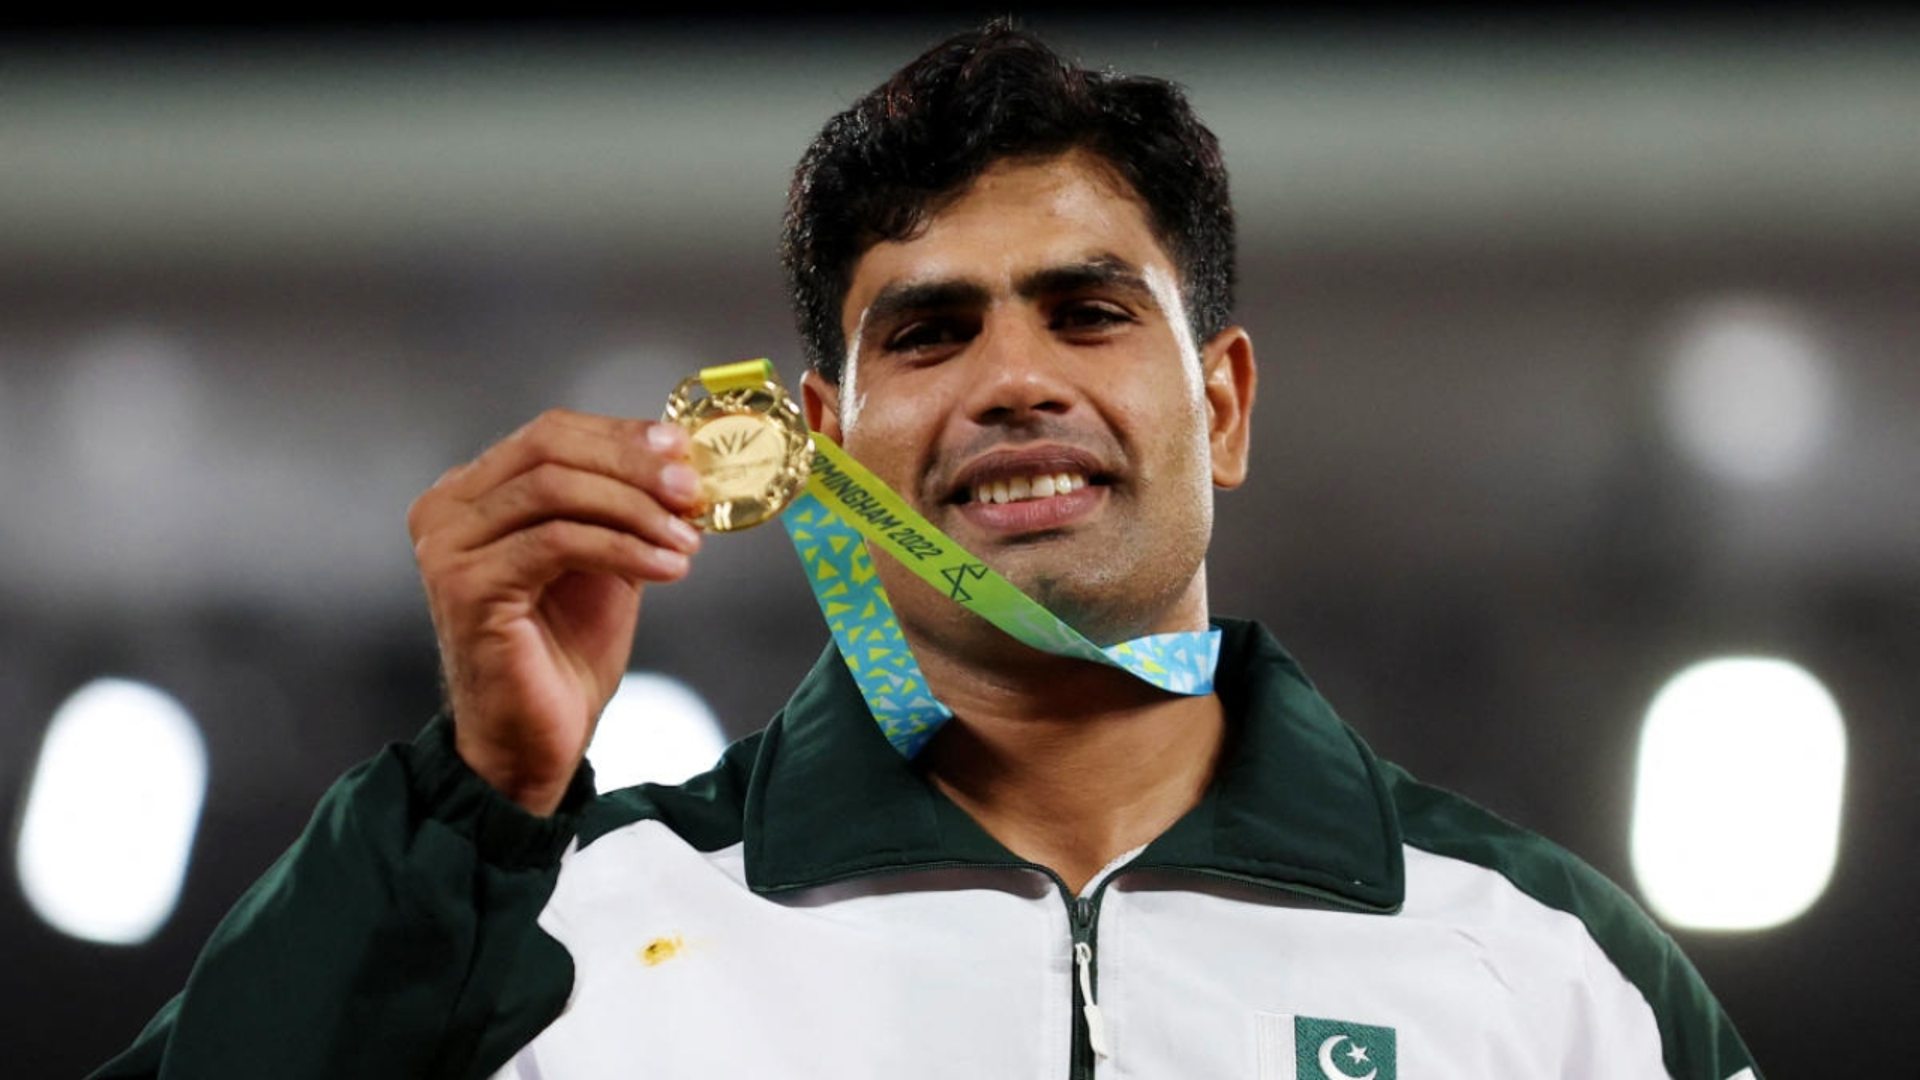 Arshad Nadeem was the gold medalist at the Commonwealth Games 2022 (Nadeem in a file photo)